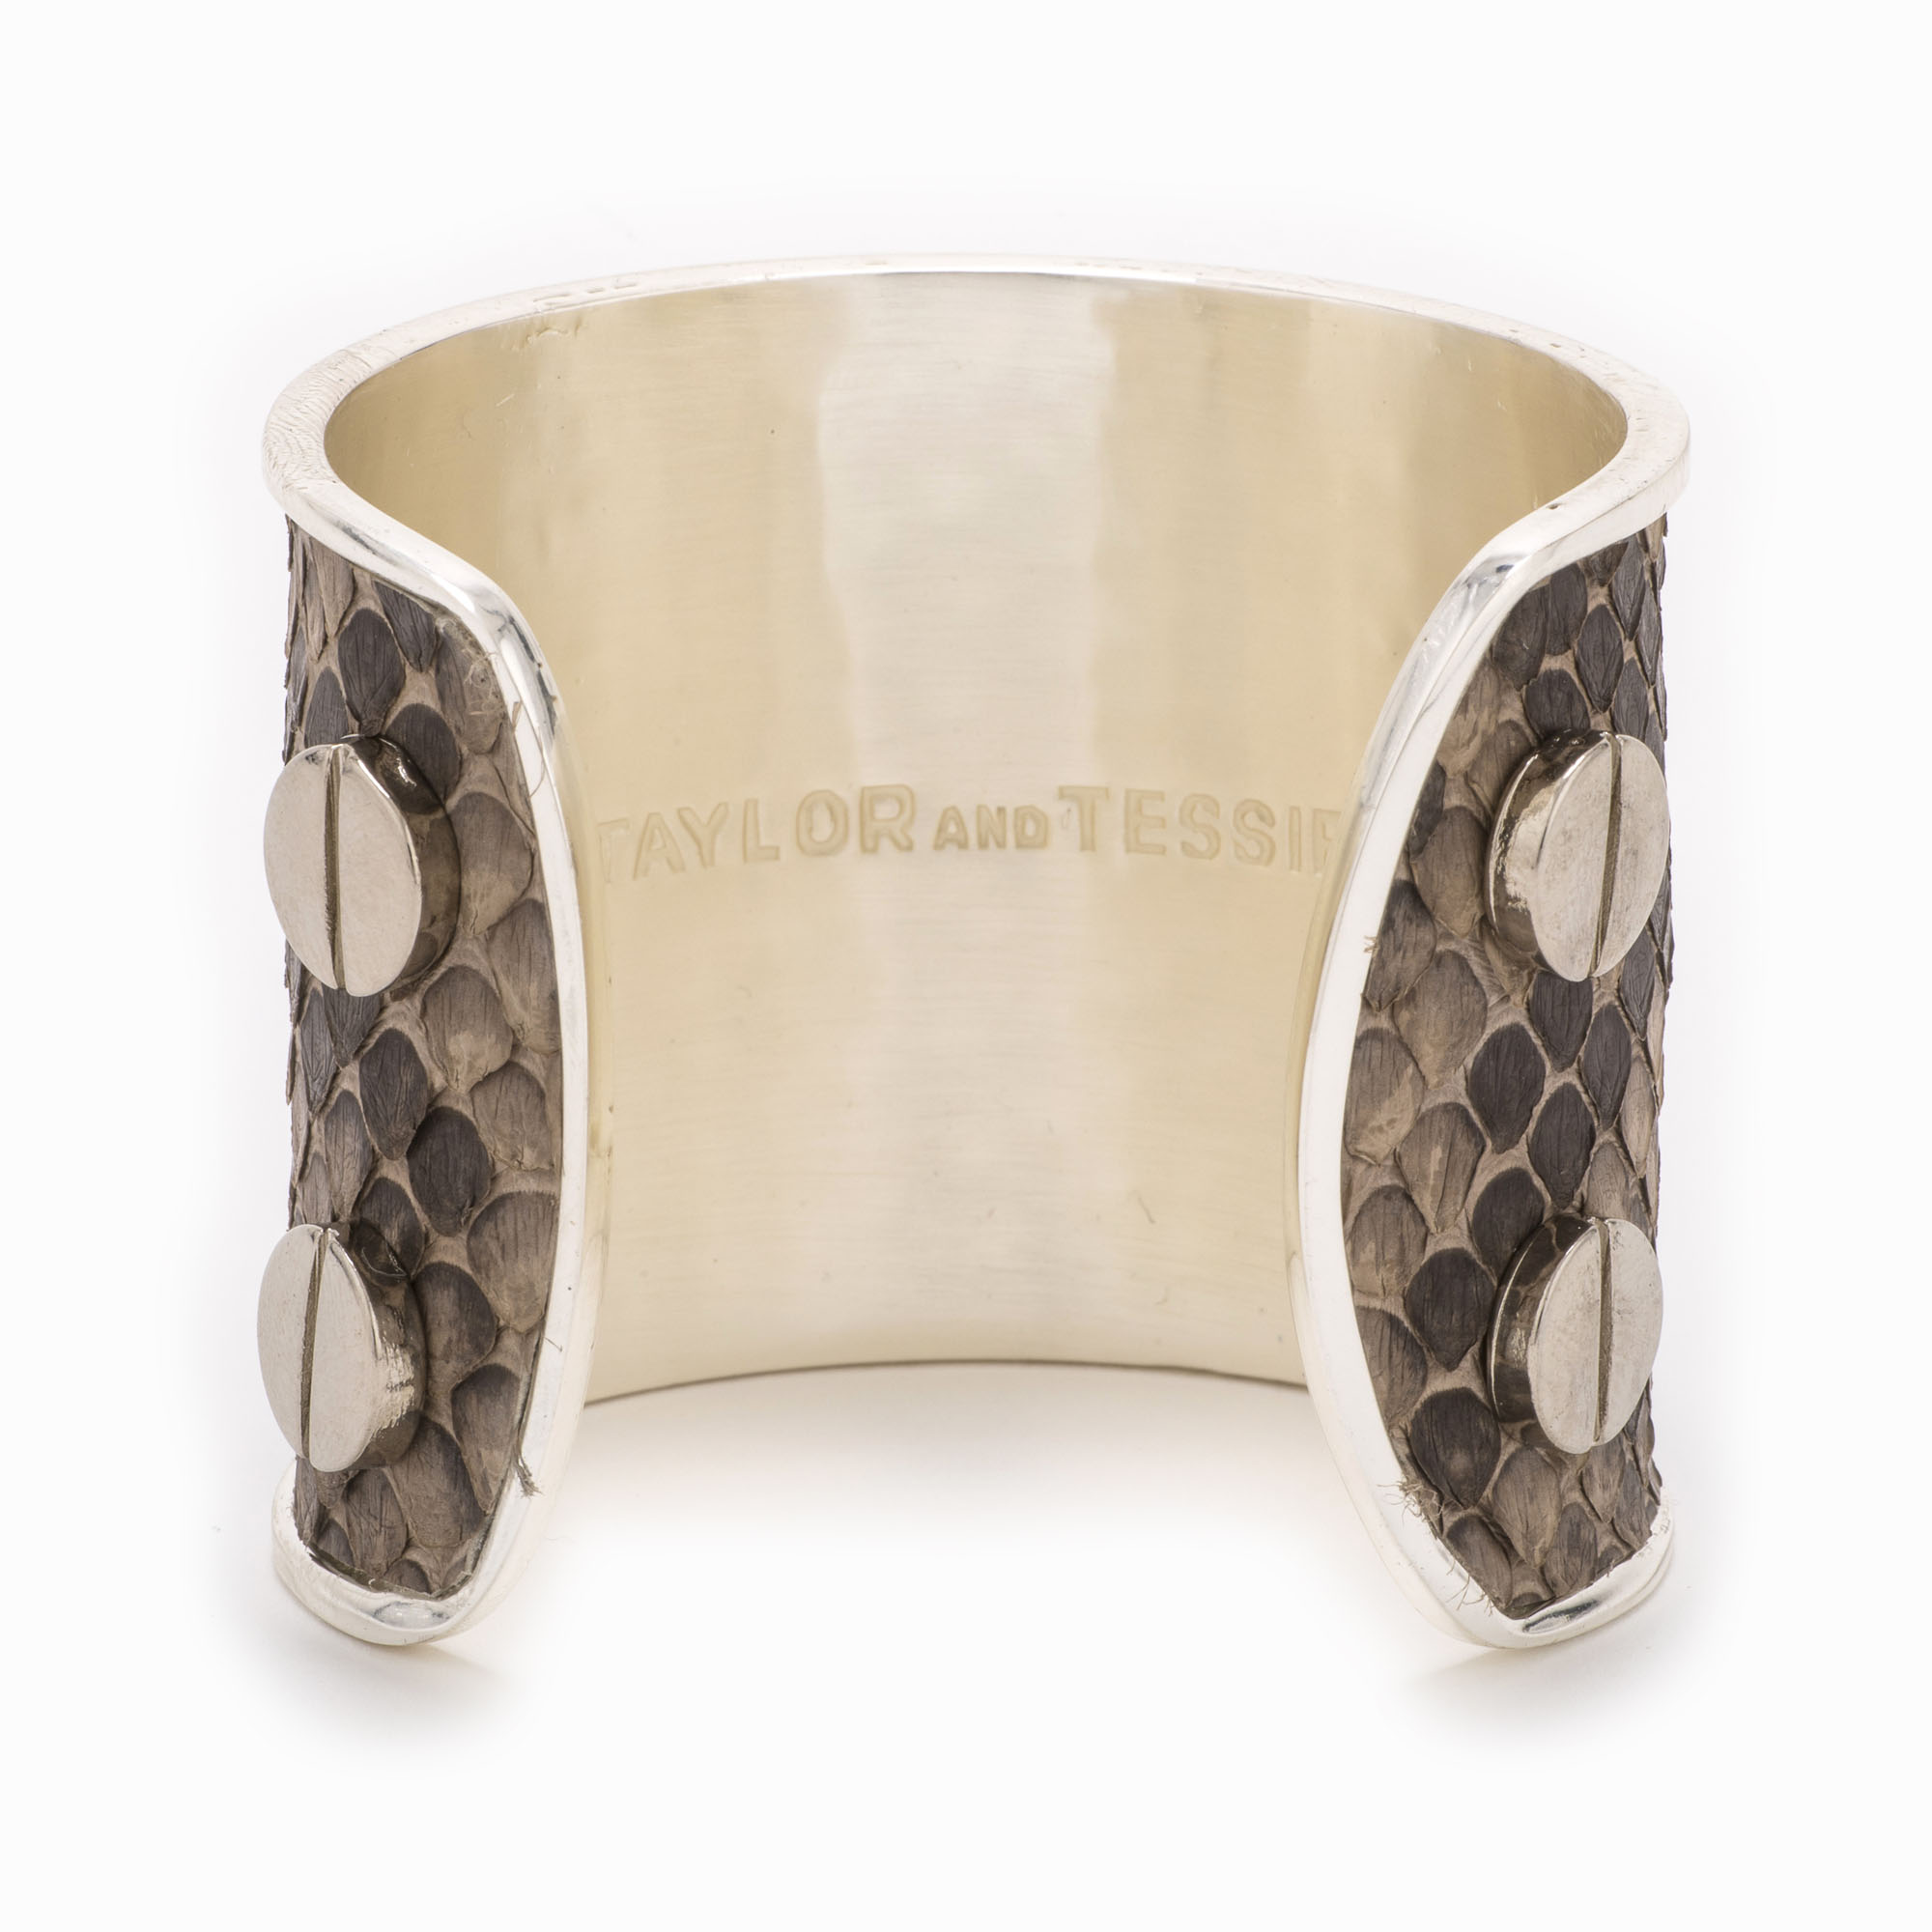 Rear view of a large silver cuff with grey and brown colored snakeskin pattern inlaid.